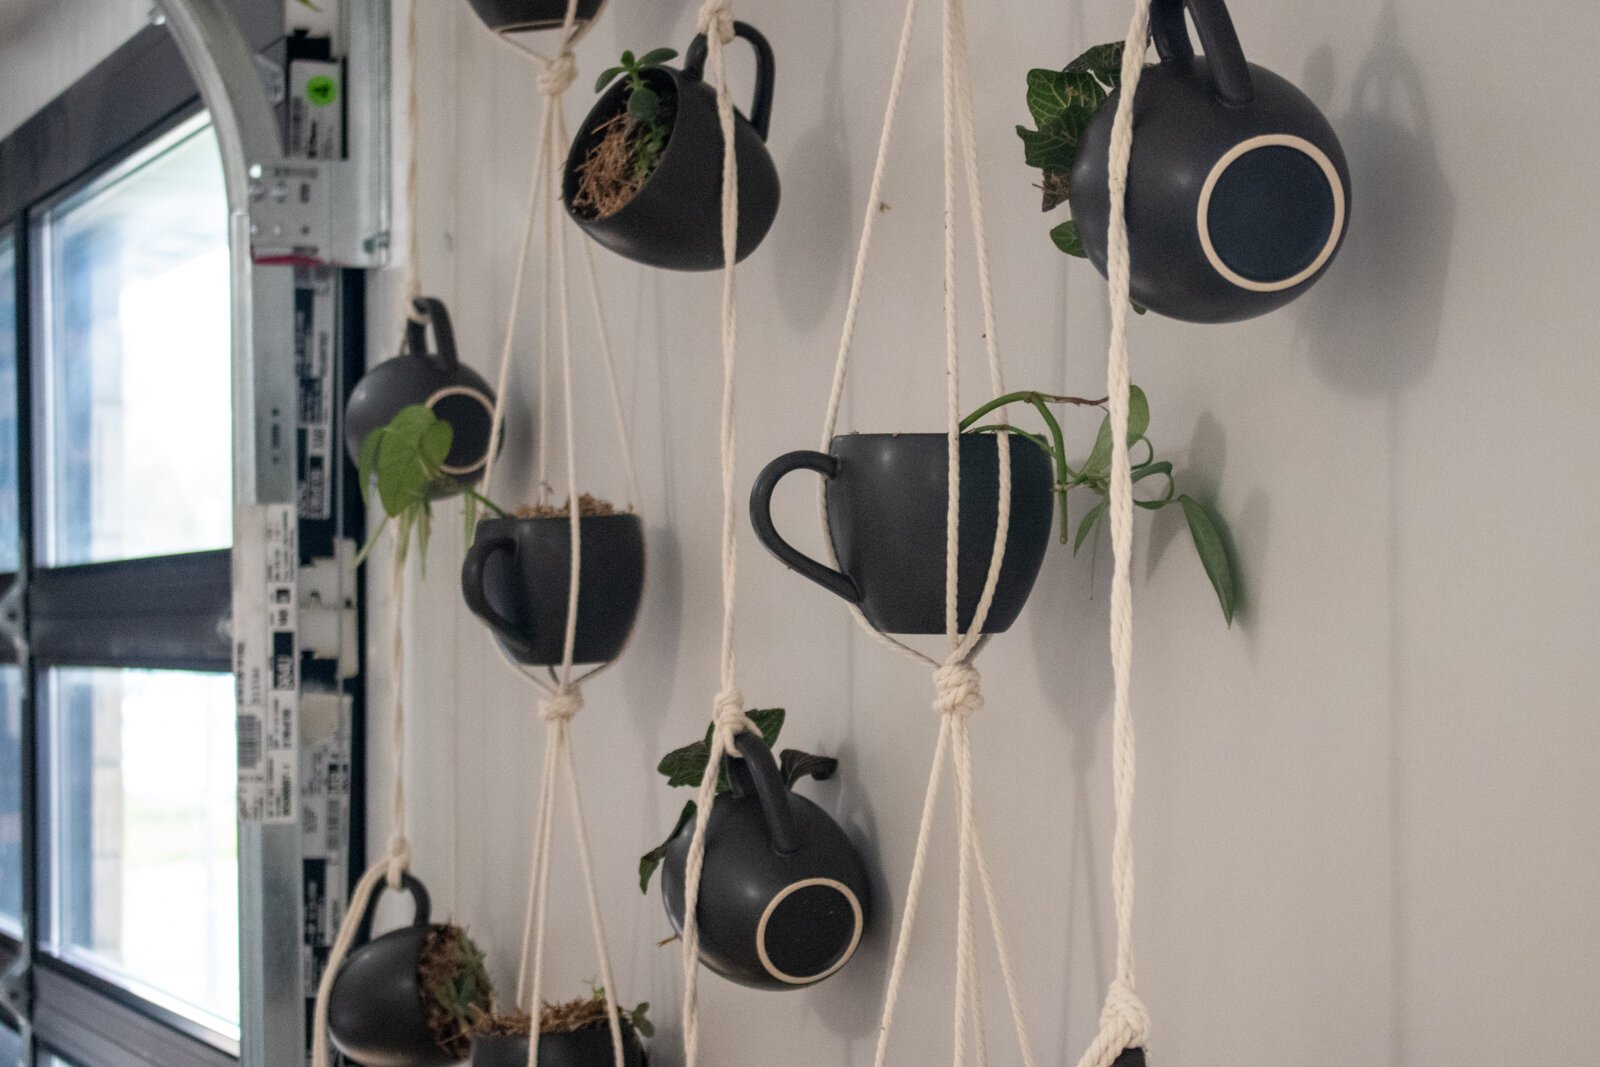 Plants in coffee cups hang from the wall at The Hive.